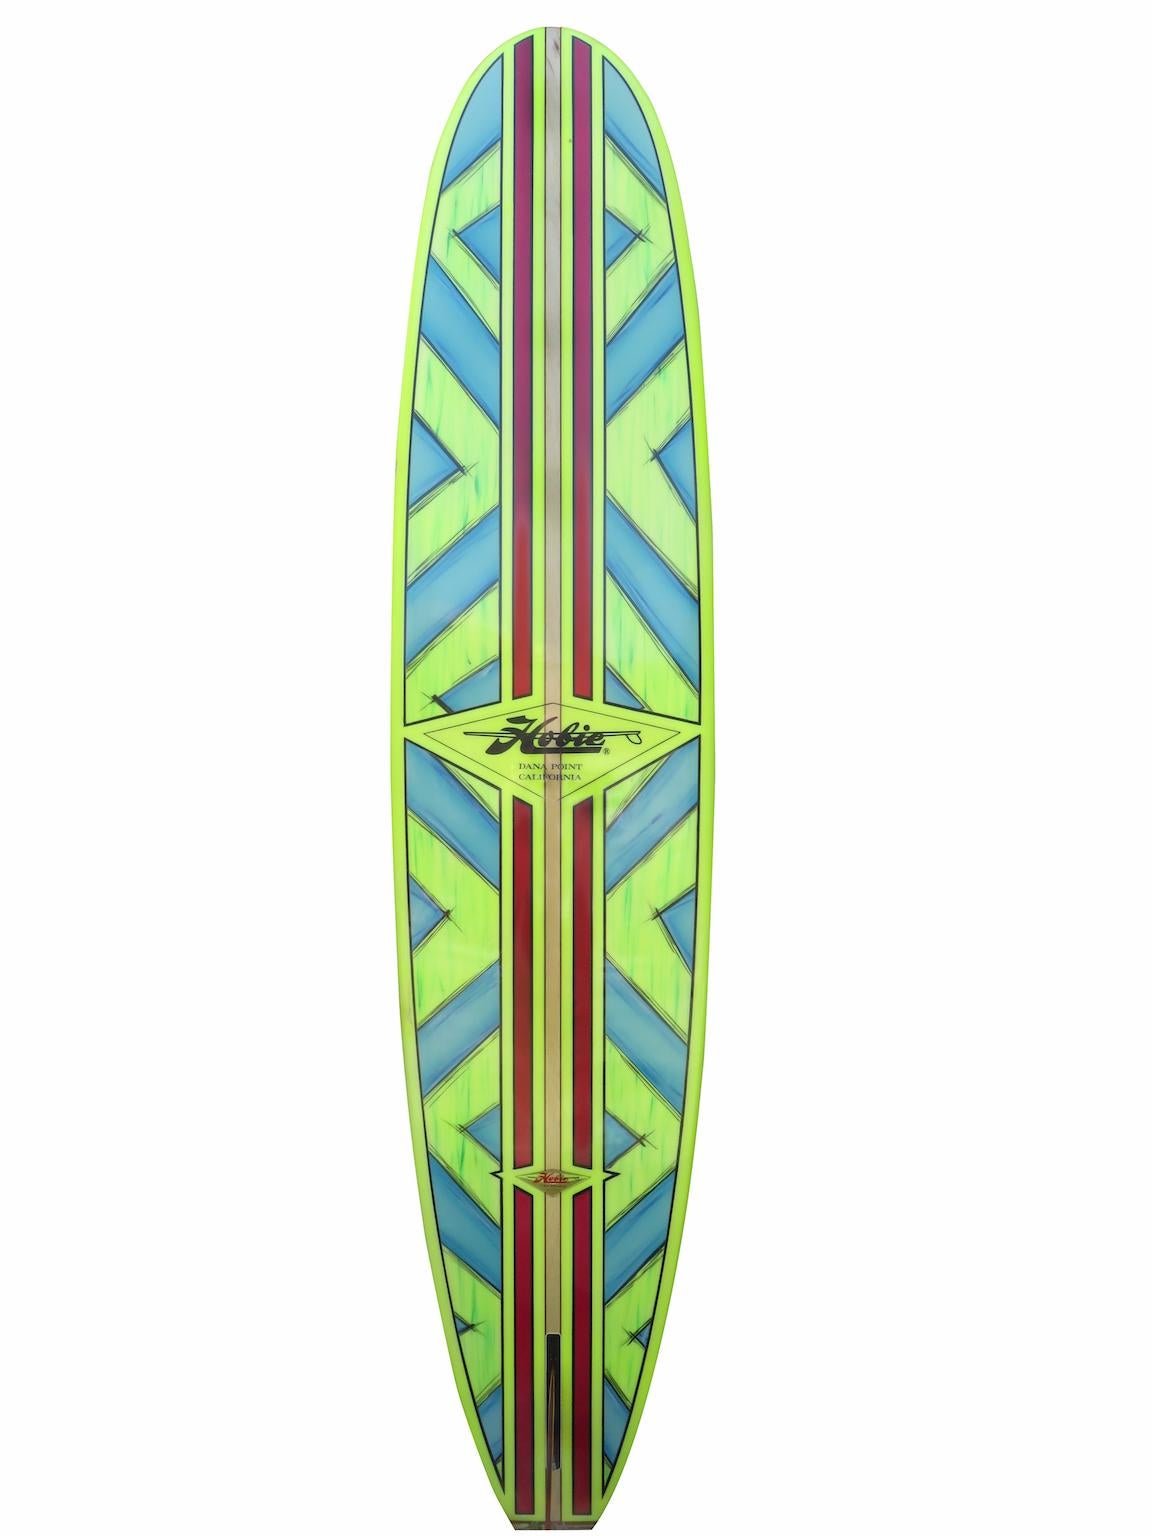 Mid-1990s Vintage Hobie Phil Edwards model longboard surfboard shaped by Phil Edwards. Featuring a custom airbrush design with T-band stringer and box single fin. This surfboard is in great all original condition and has never been surfed!

Phil